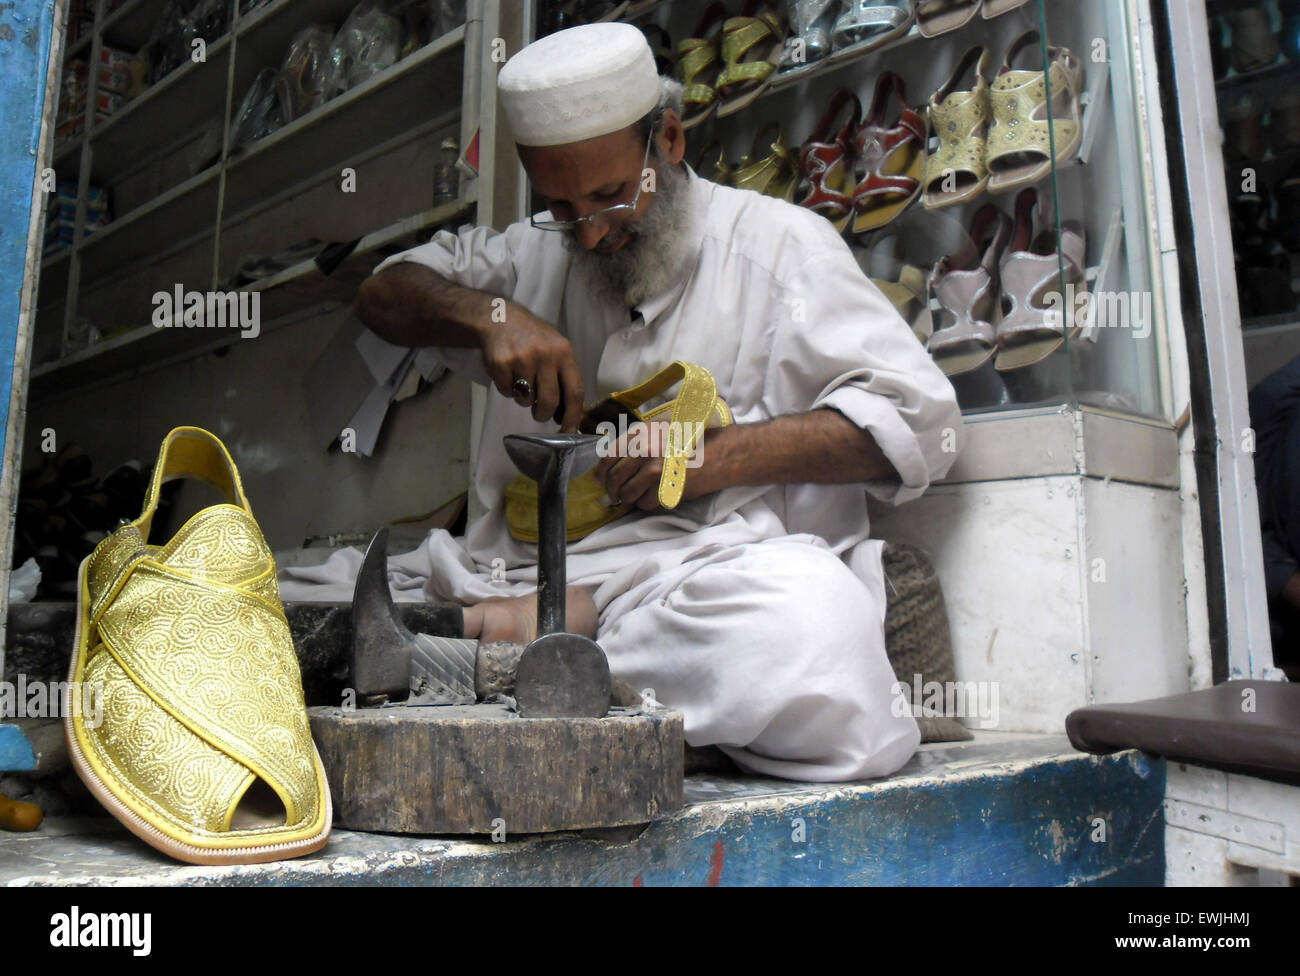 Peshawar. 27th June, 2015. A Pakistani man prepares traditional Peshawari Chappal at a workshop in northwest Pakistan's Peshawar, June 27, 2015. Peshawari Chappal is a traditional footwear of Pakistan, worn especially by Pashtuns in the Khyber Pakhtunkhwa region of Pakistan. © Ahmad Sidique/Xinhua/Alamy Live News Stock Photo